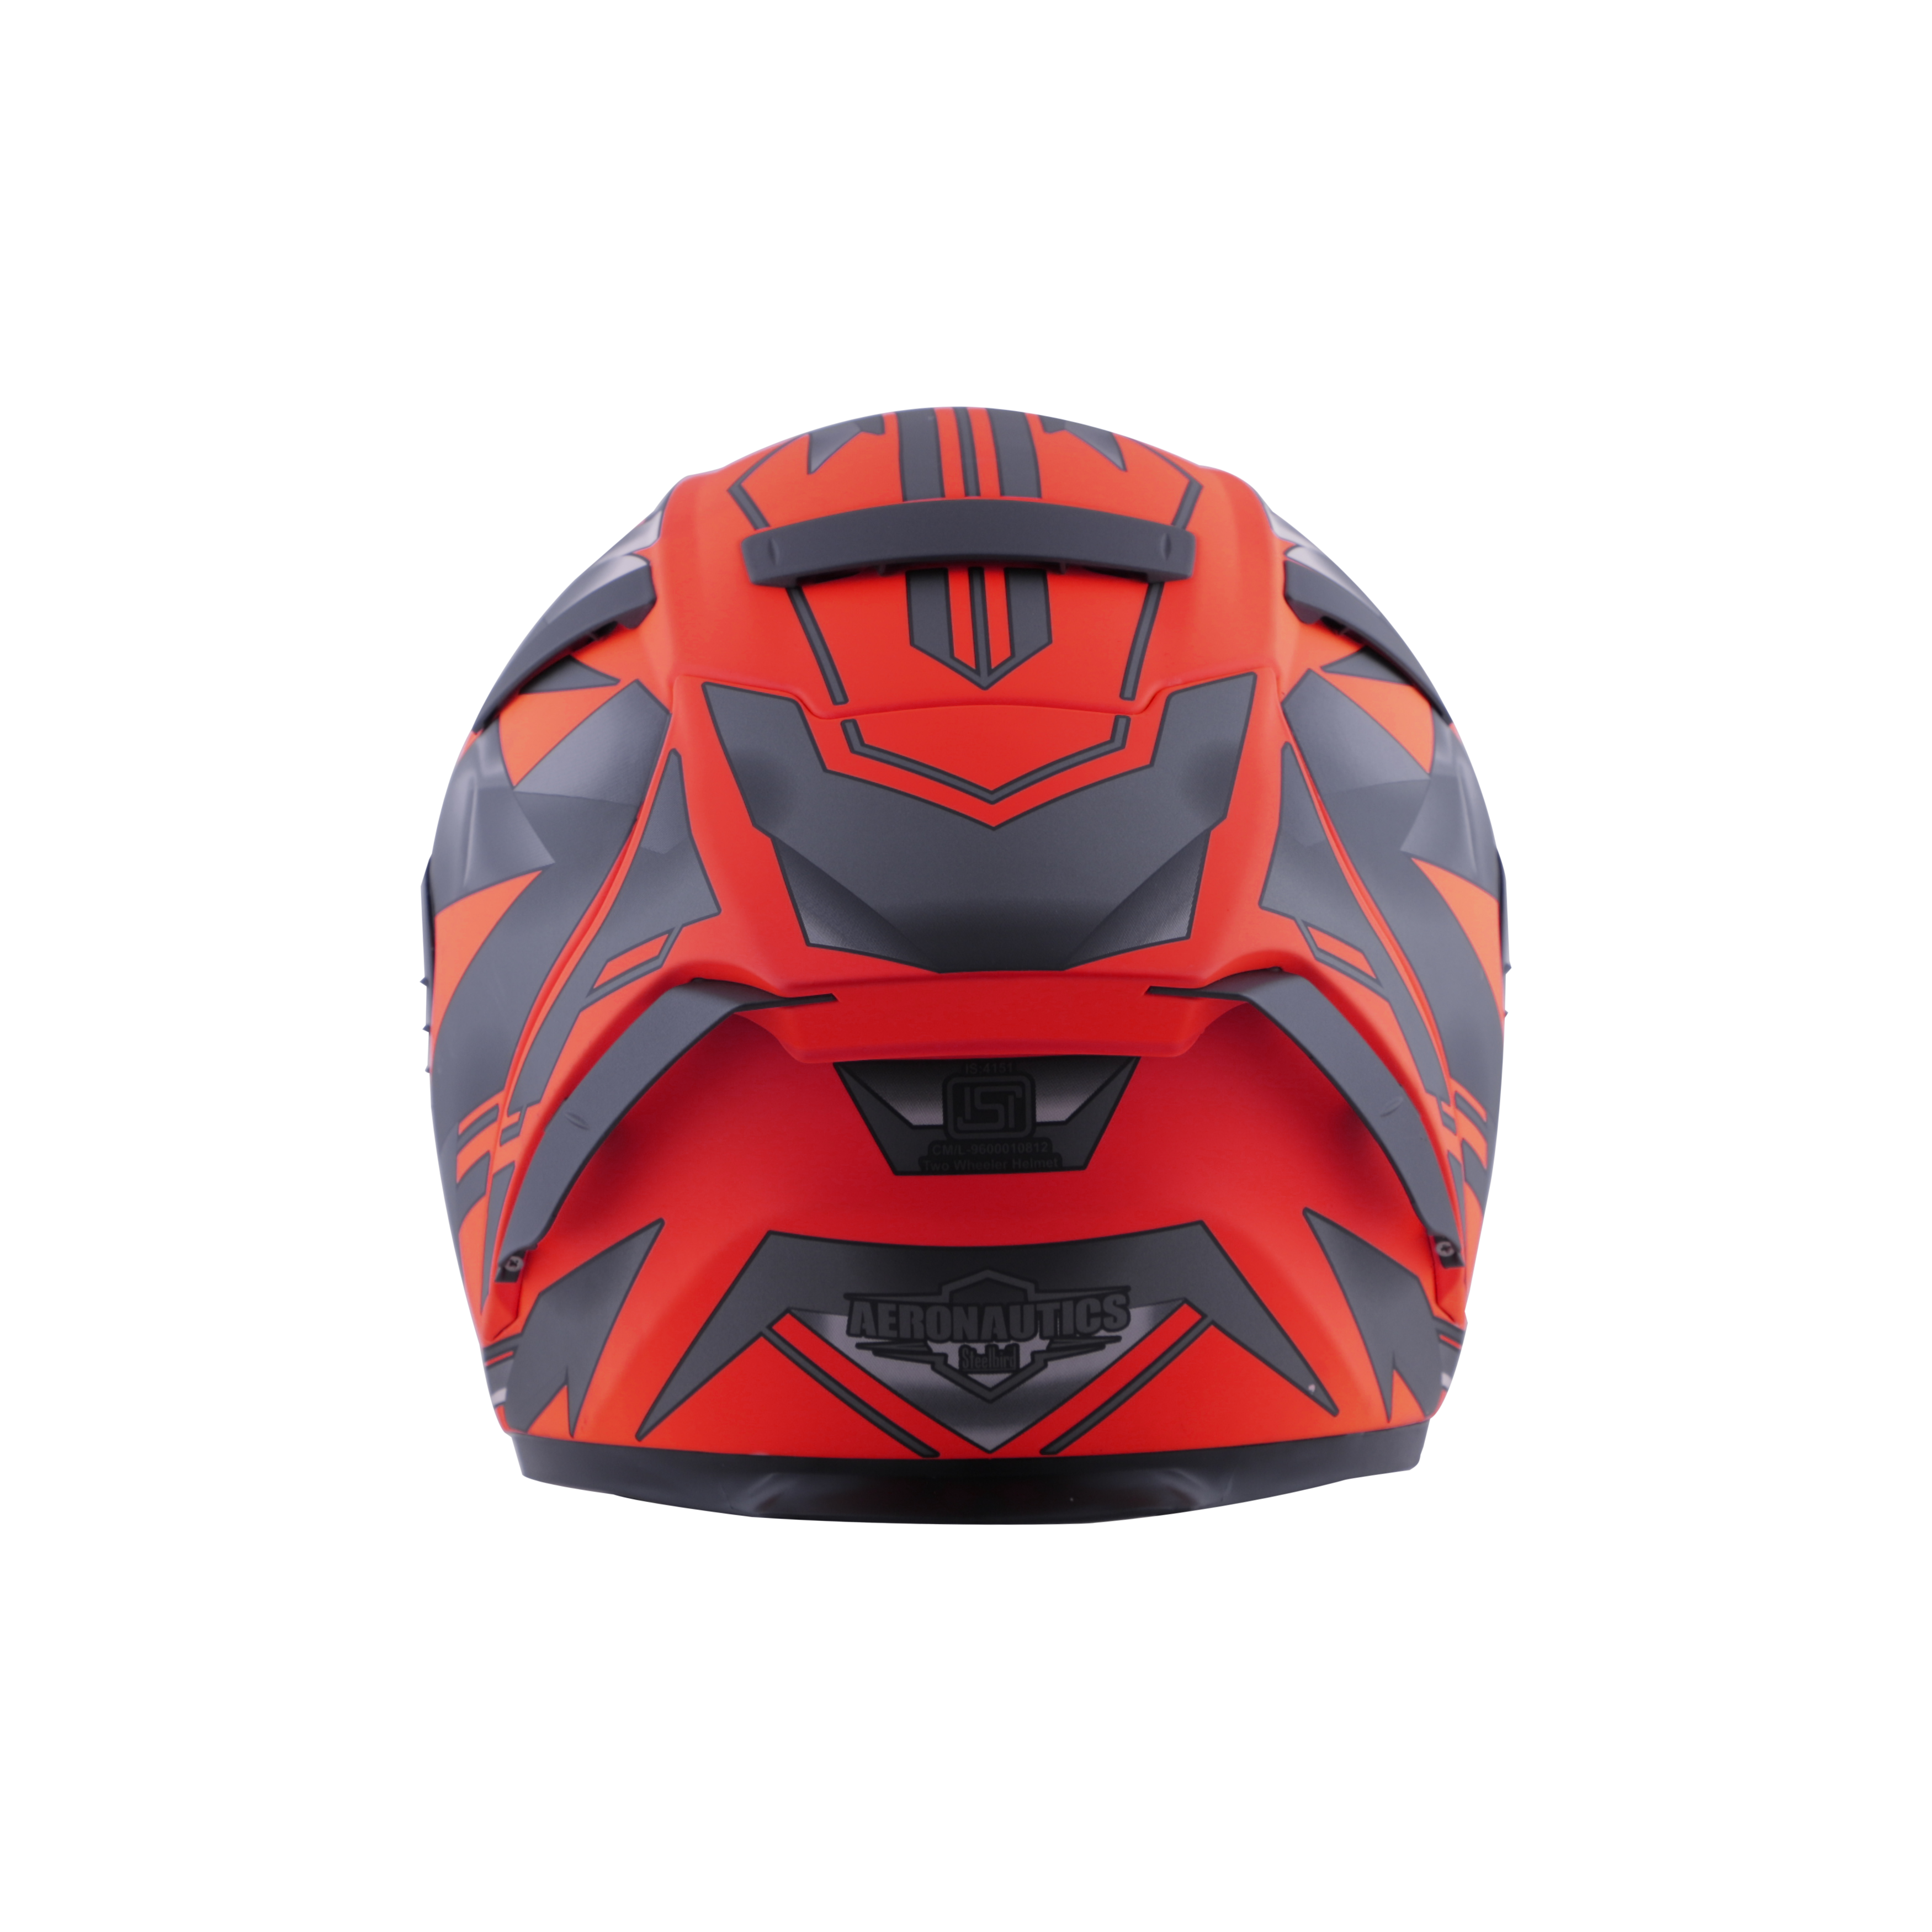 SA-2 METALLIC GLOSSY FLUO RED WITH GREY ( FITTED WITH CLEAR VISOR  EXTRA CHROME GOLD VISOR FREE) WITH ANTI-FOG SHIELD HOLDER